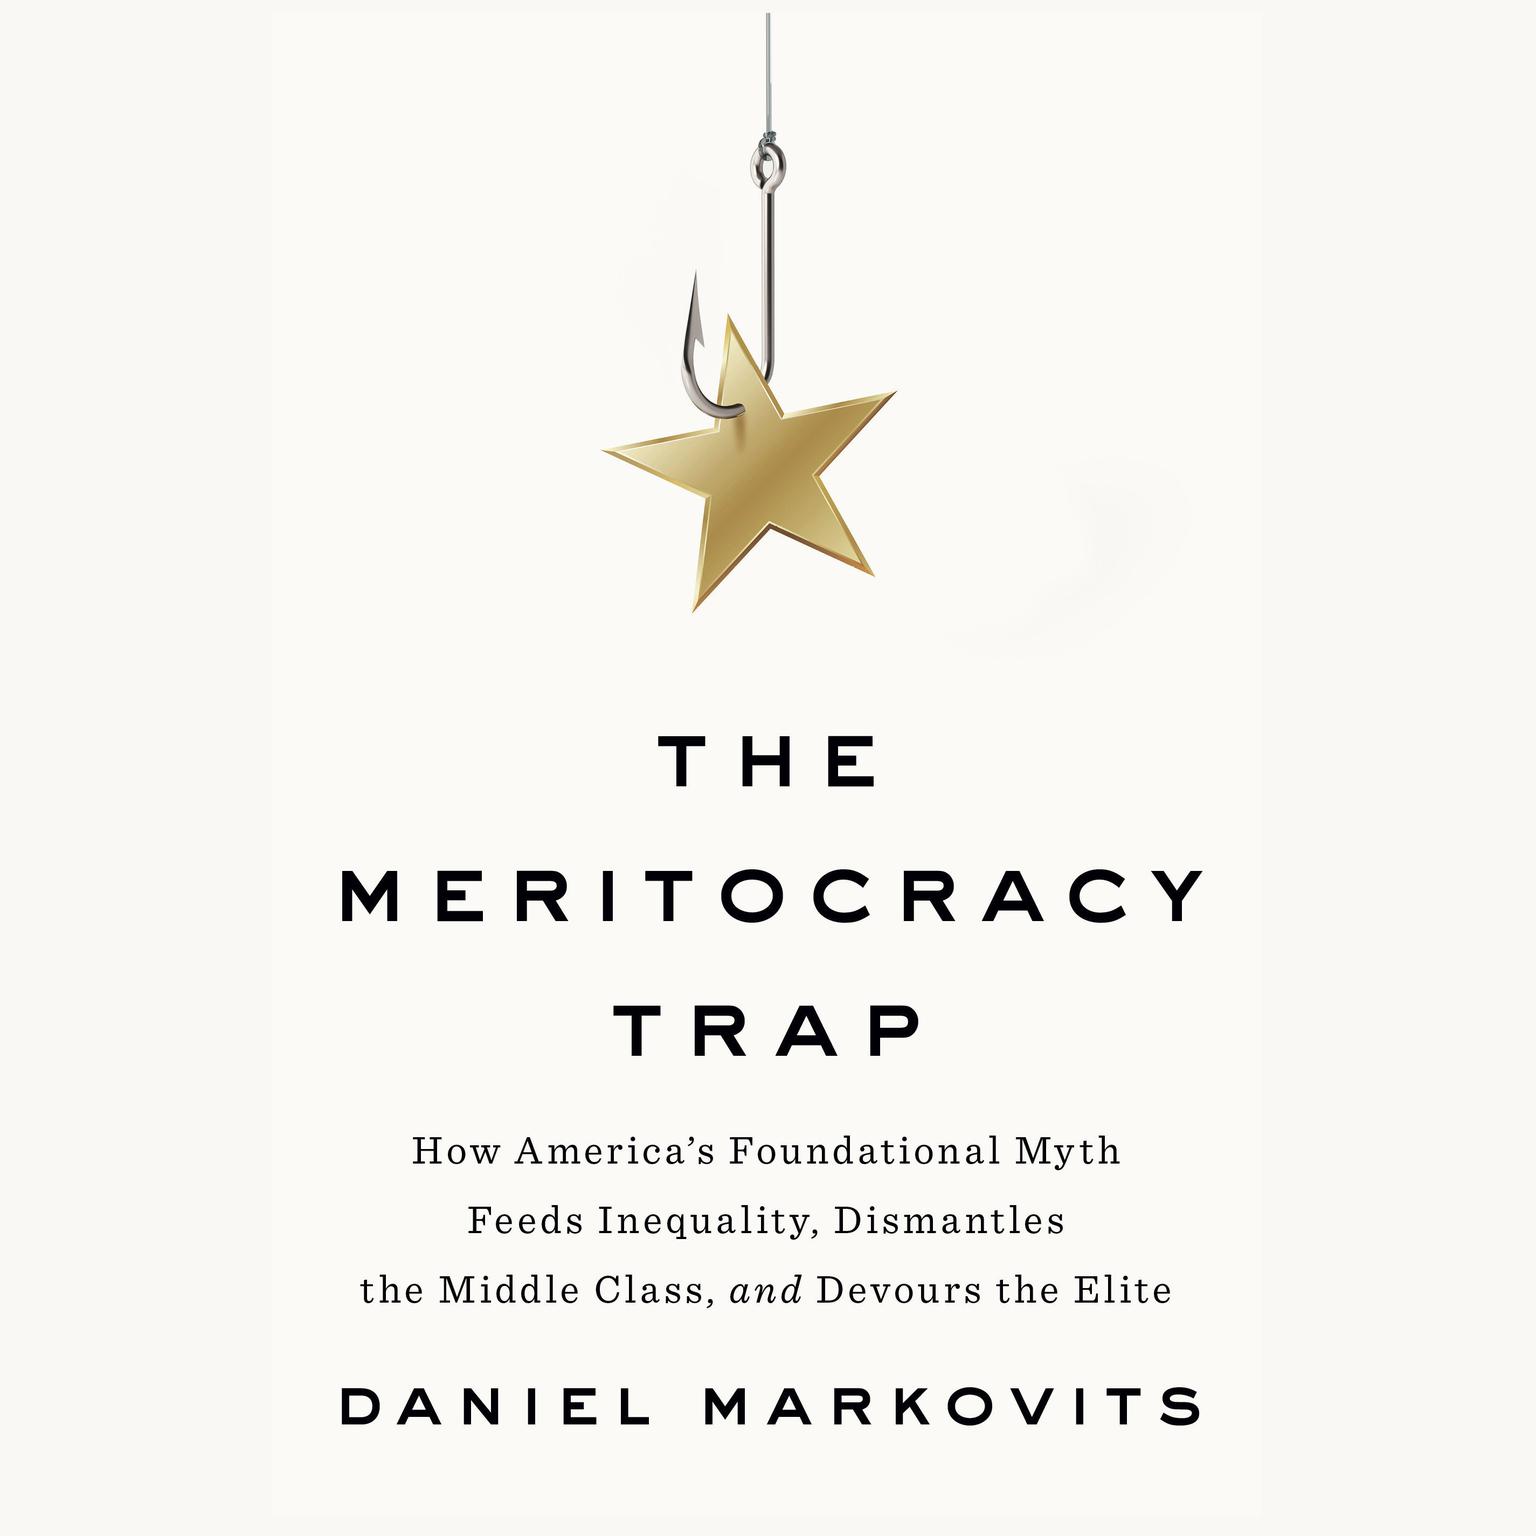 The Meritocracy Trap: How Americas Foundational Myth Feeds Inequality, Dismantles the Middle Class, and Devours the Elite Audiobook, by Daniel Markovits